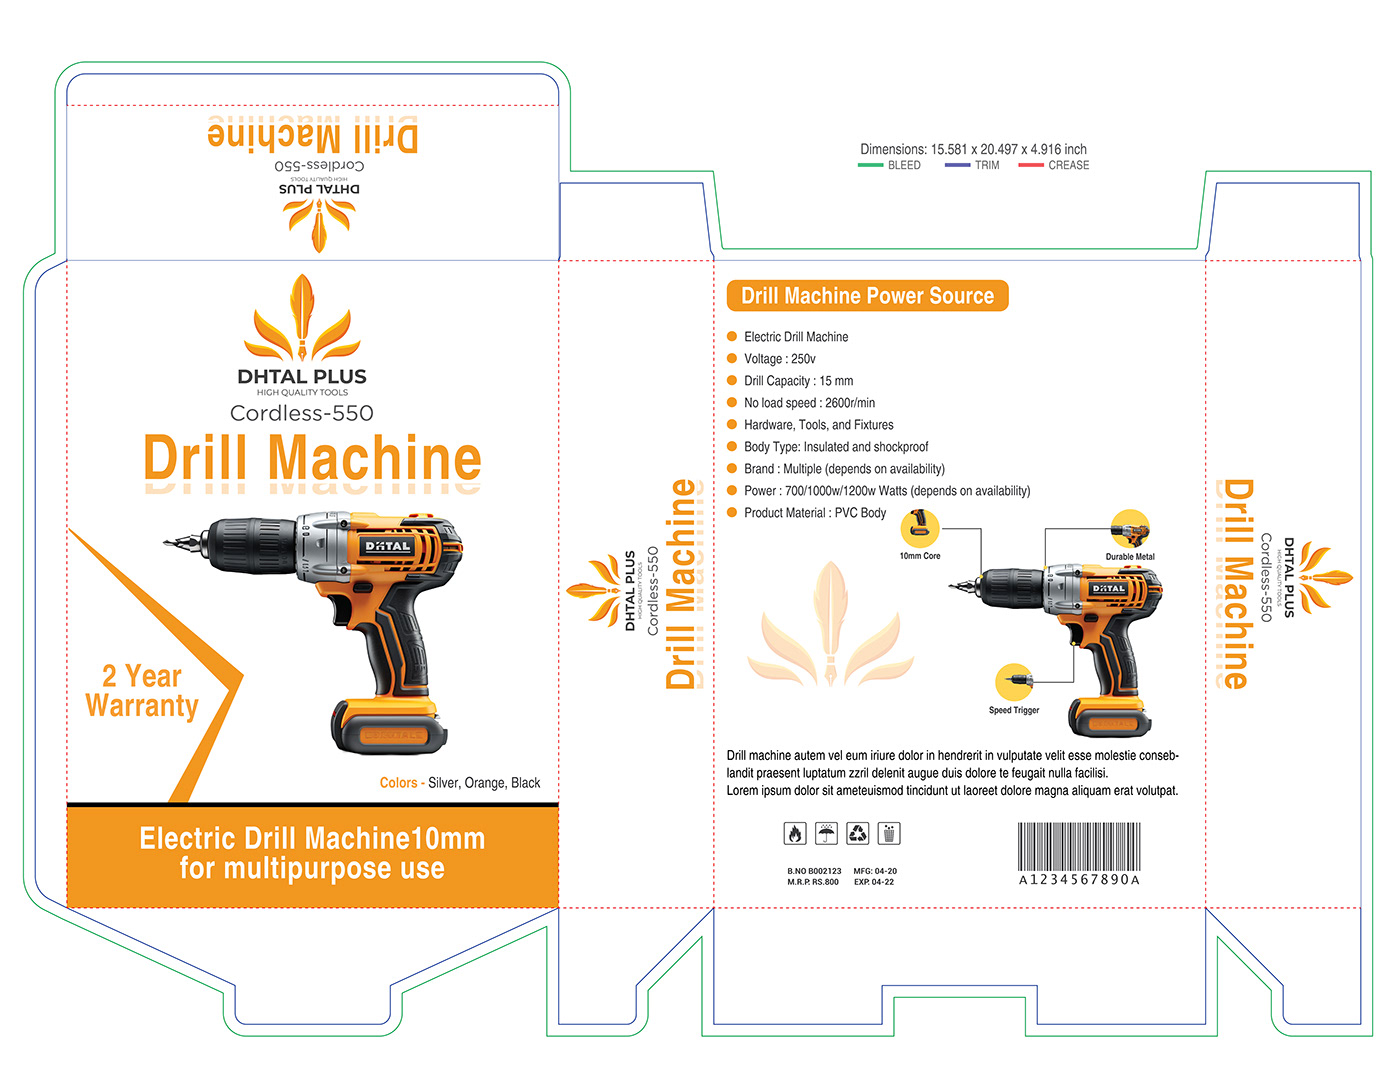 Product Box package design  packaging designer Amazon Product box packaging custom boxes product design  Packaging product label design drill machine box